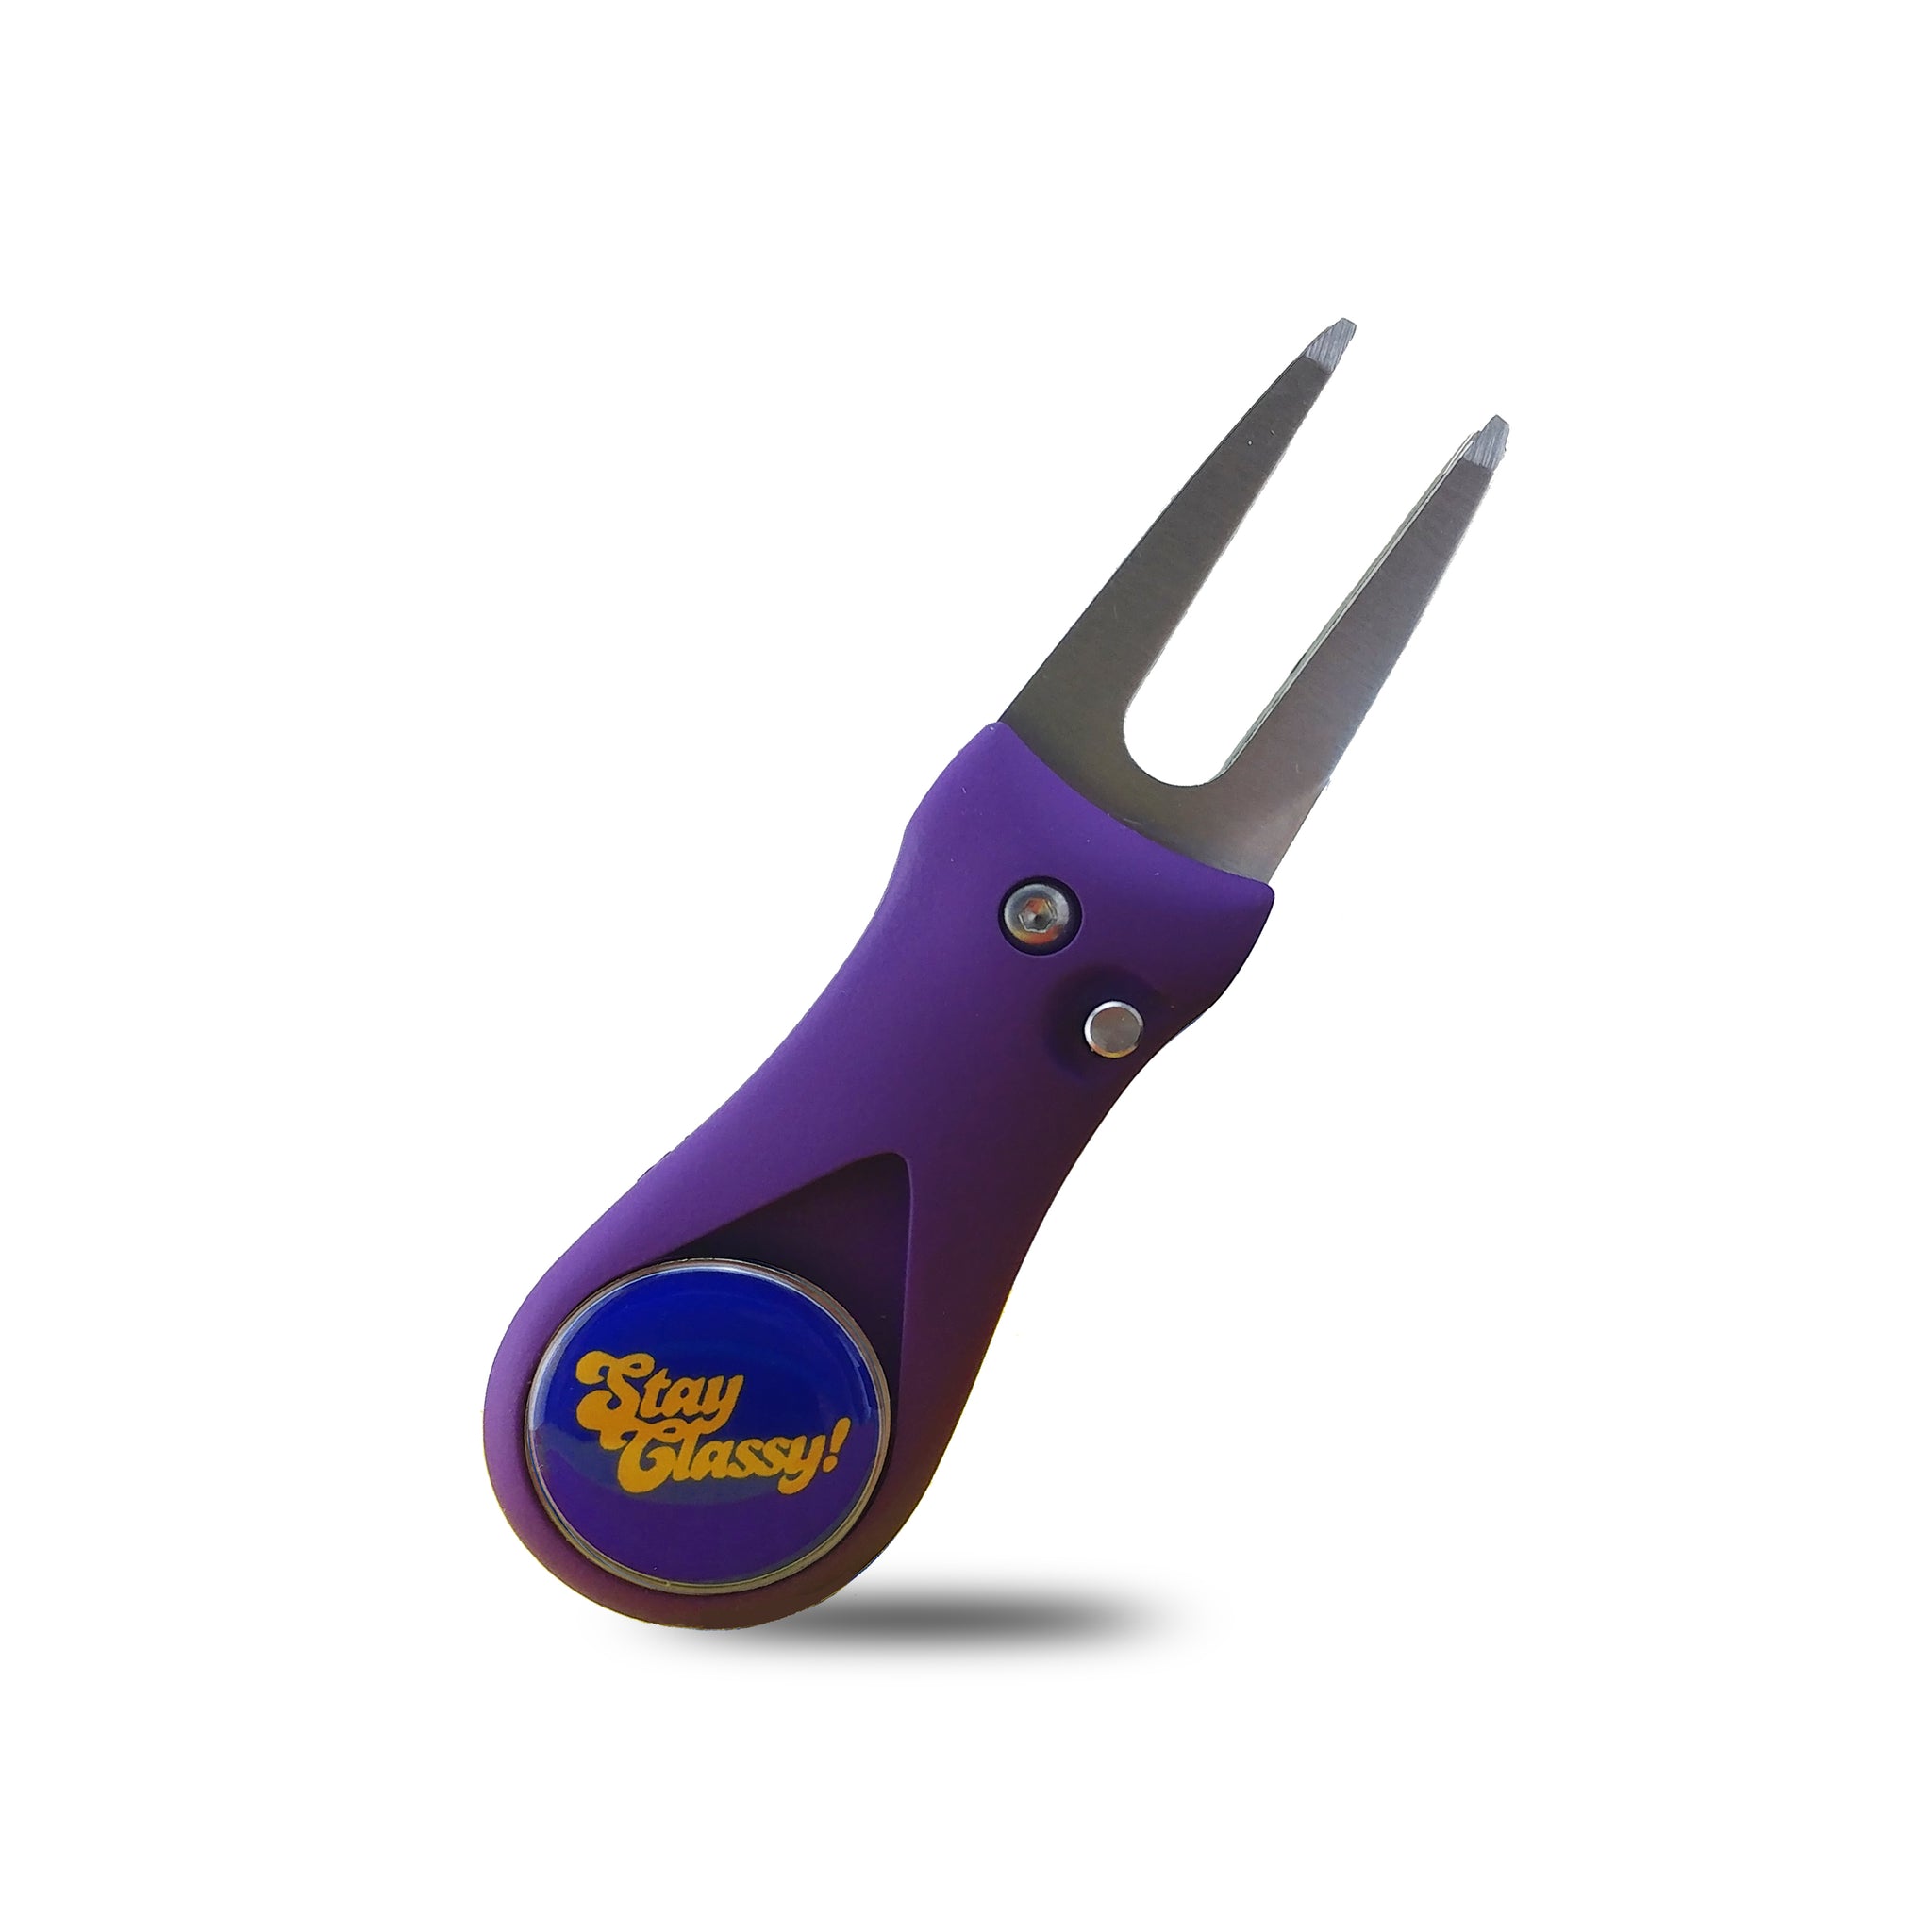 RPG Featherlite Switchblade Divot Tool (PURPLE-STAY CLASSY) - RED PLANET GOLF